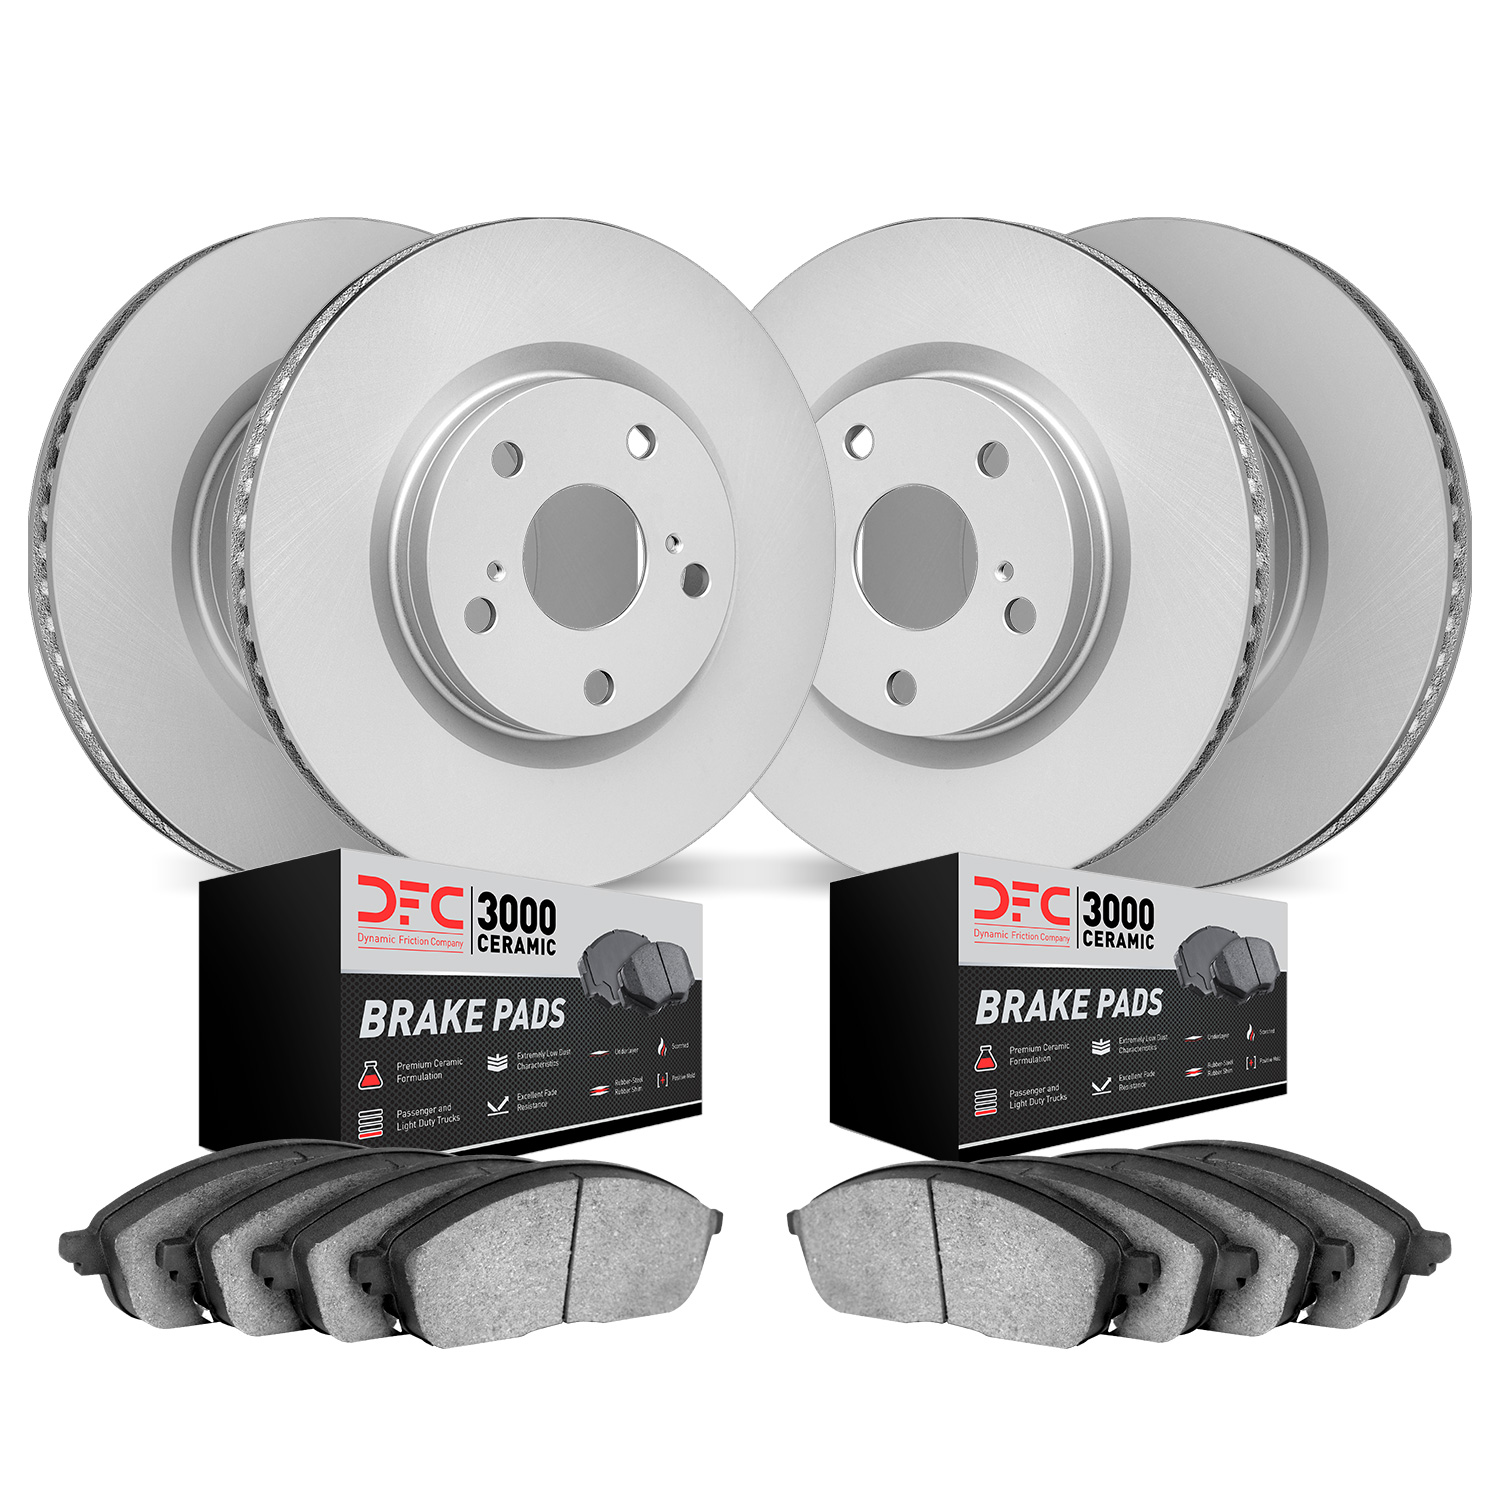 4304-76061 Geospec Brake Rotors with 3000-Series Ceramic Brake Pads Kit, Fits Select Lexus/Toyota/Scion, Position: Front and Rea